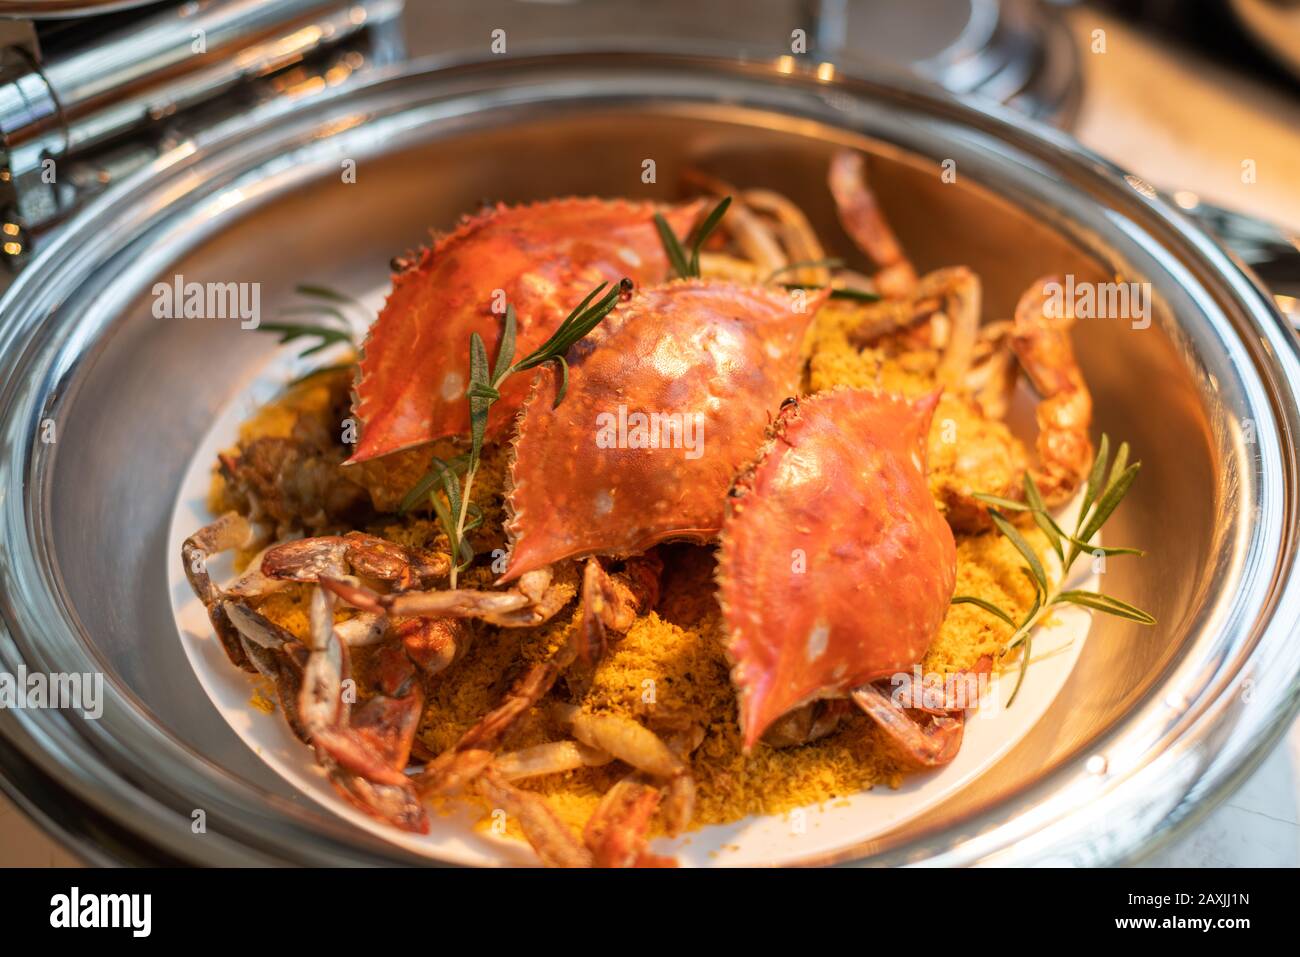 Chinese crab dish on a plate Stock Photo